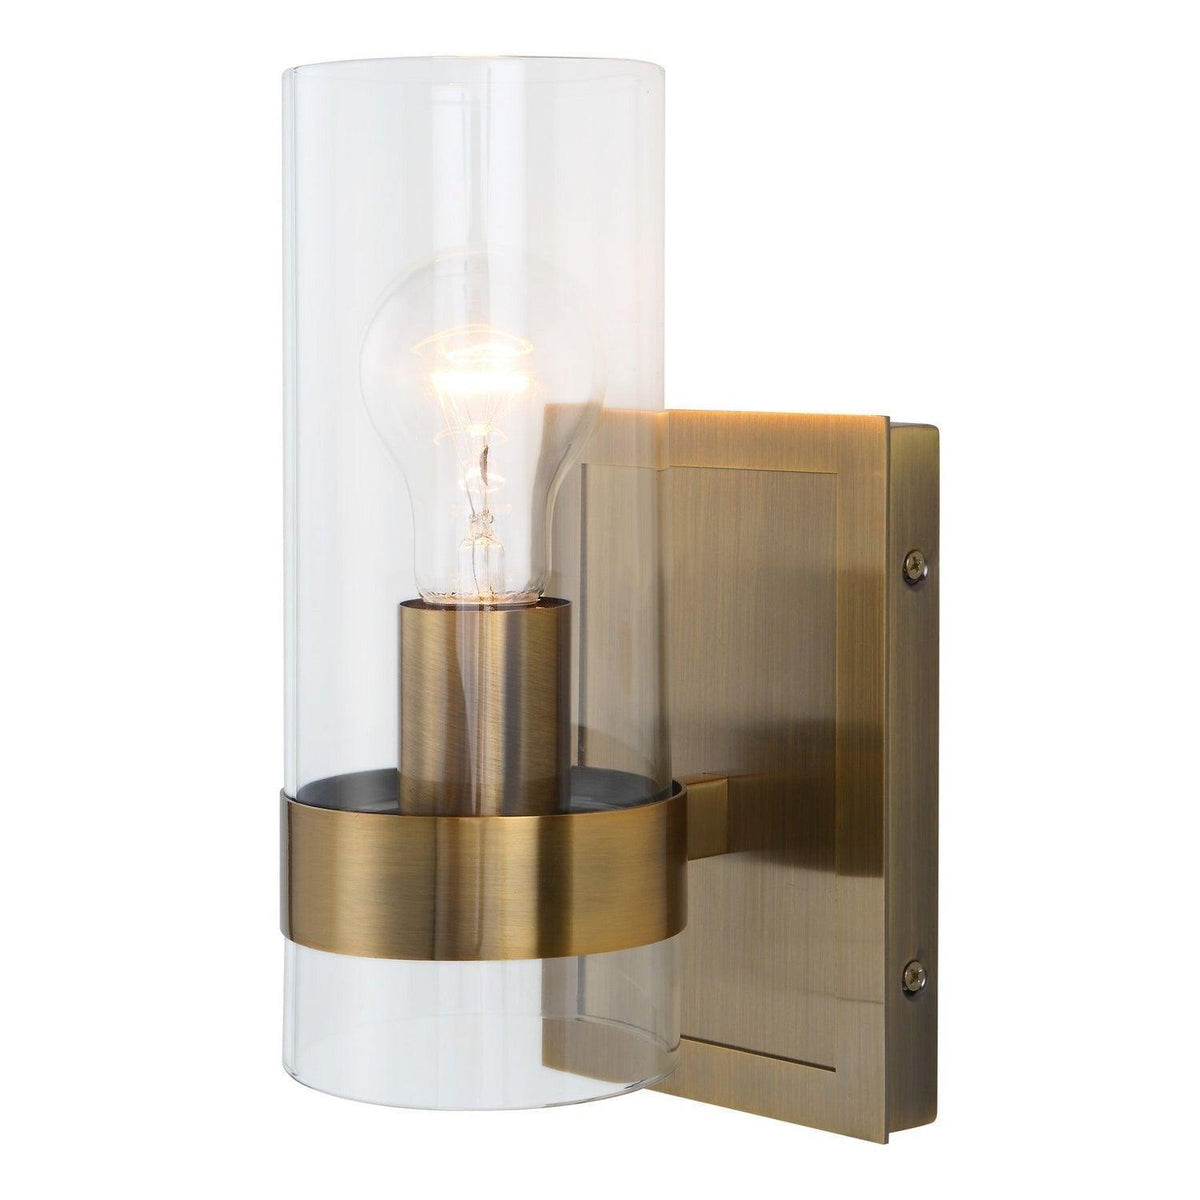 The Uttermost - Cardiff Wall Sconce - 22549 | Montreal Lighting & Hardware